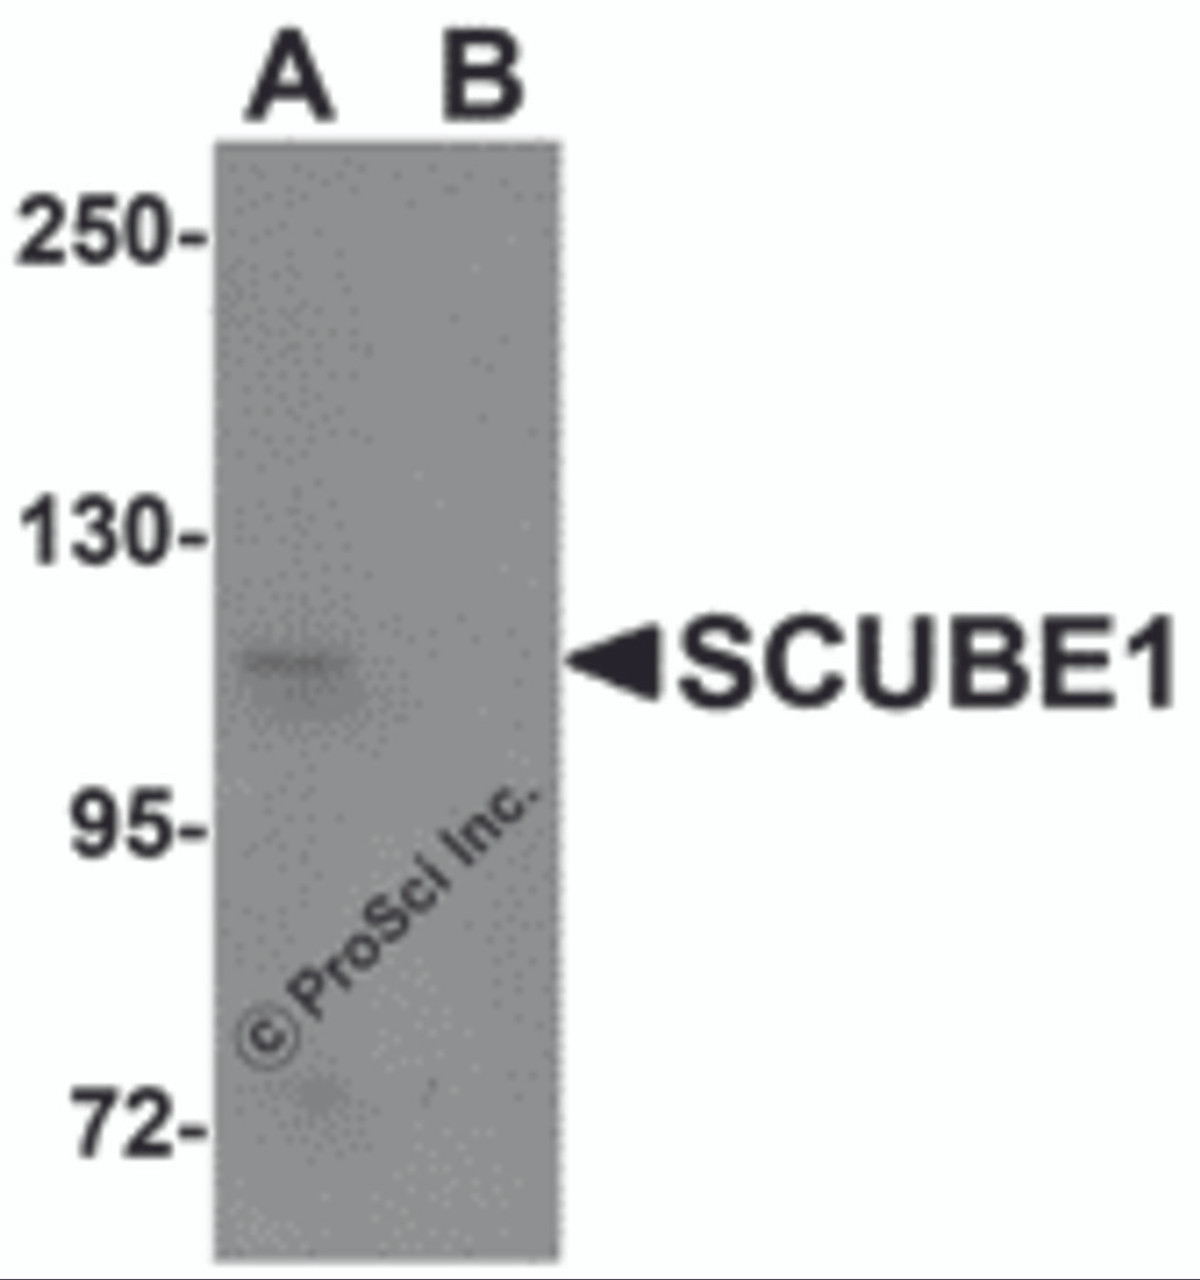 Western blot analysis of SCUBE1 in Daudi cell lysate with SCUBE1 antibody at 1 &#956;g/mL in (A) the absence and (B) the presence of blocking peptide.